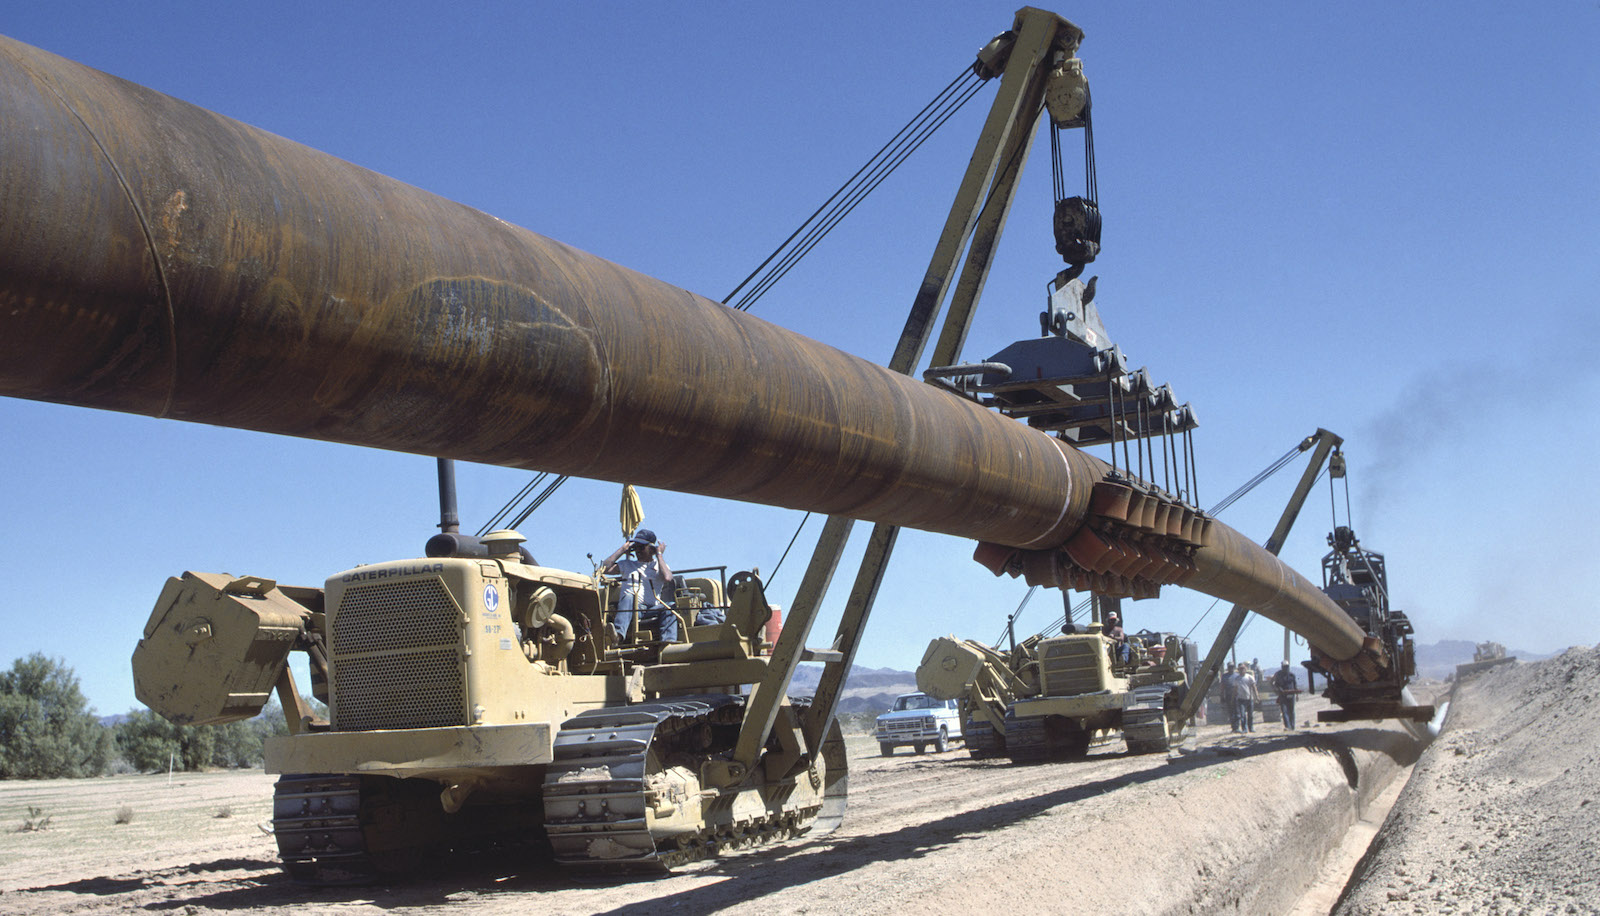 A crane lifts a section of pipeline into a trench